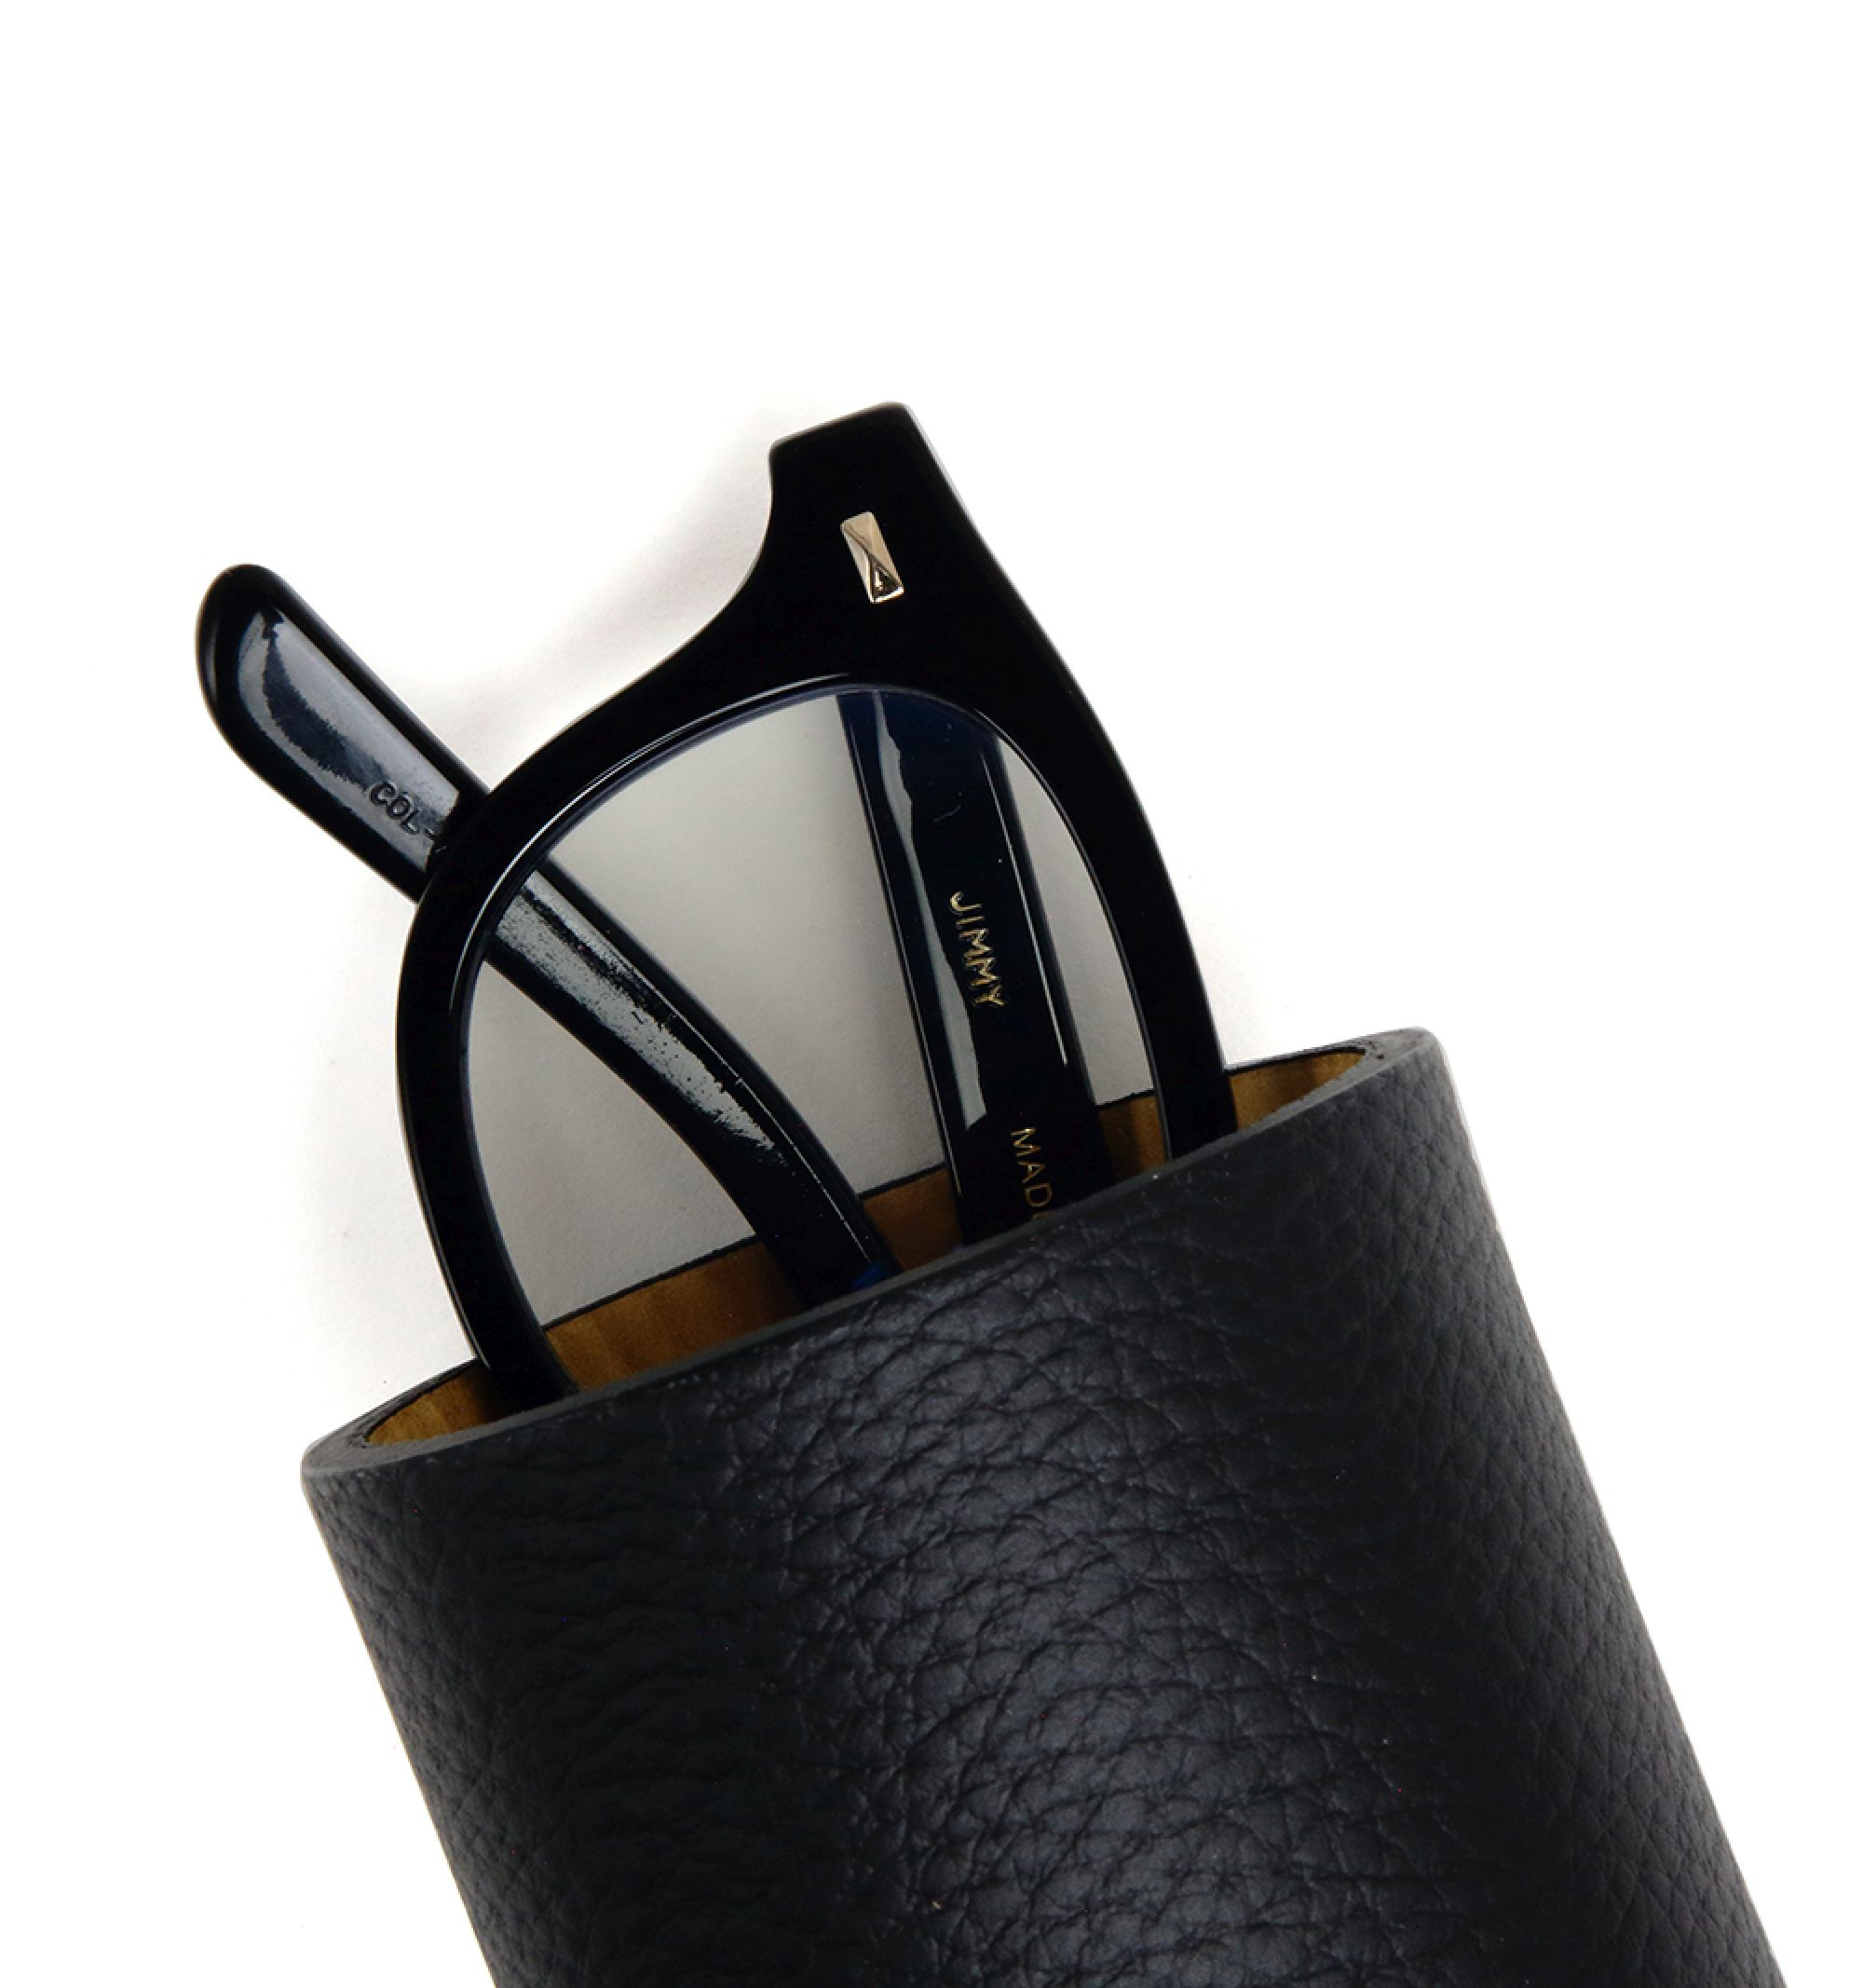 DIFFUSER TOKYO / DURABLE LEATHER EYEWEAR STAND / BLACK & YELLOW